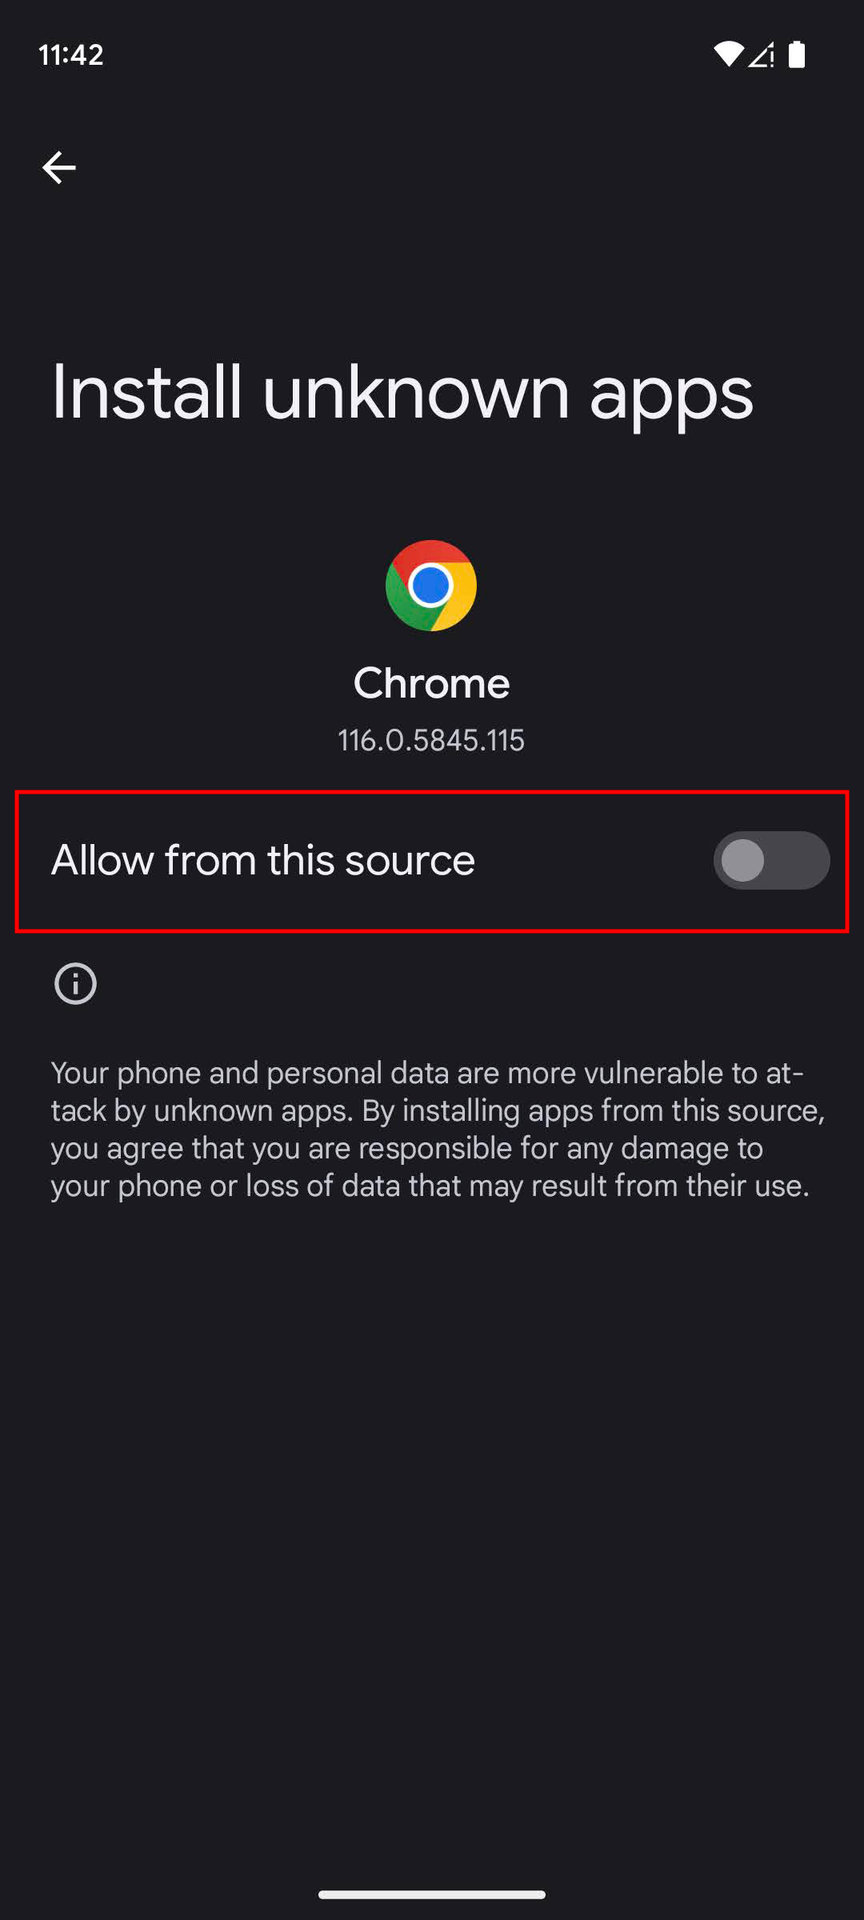 How to revoke acces to install apps from unknown sources (5)